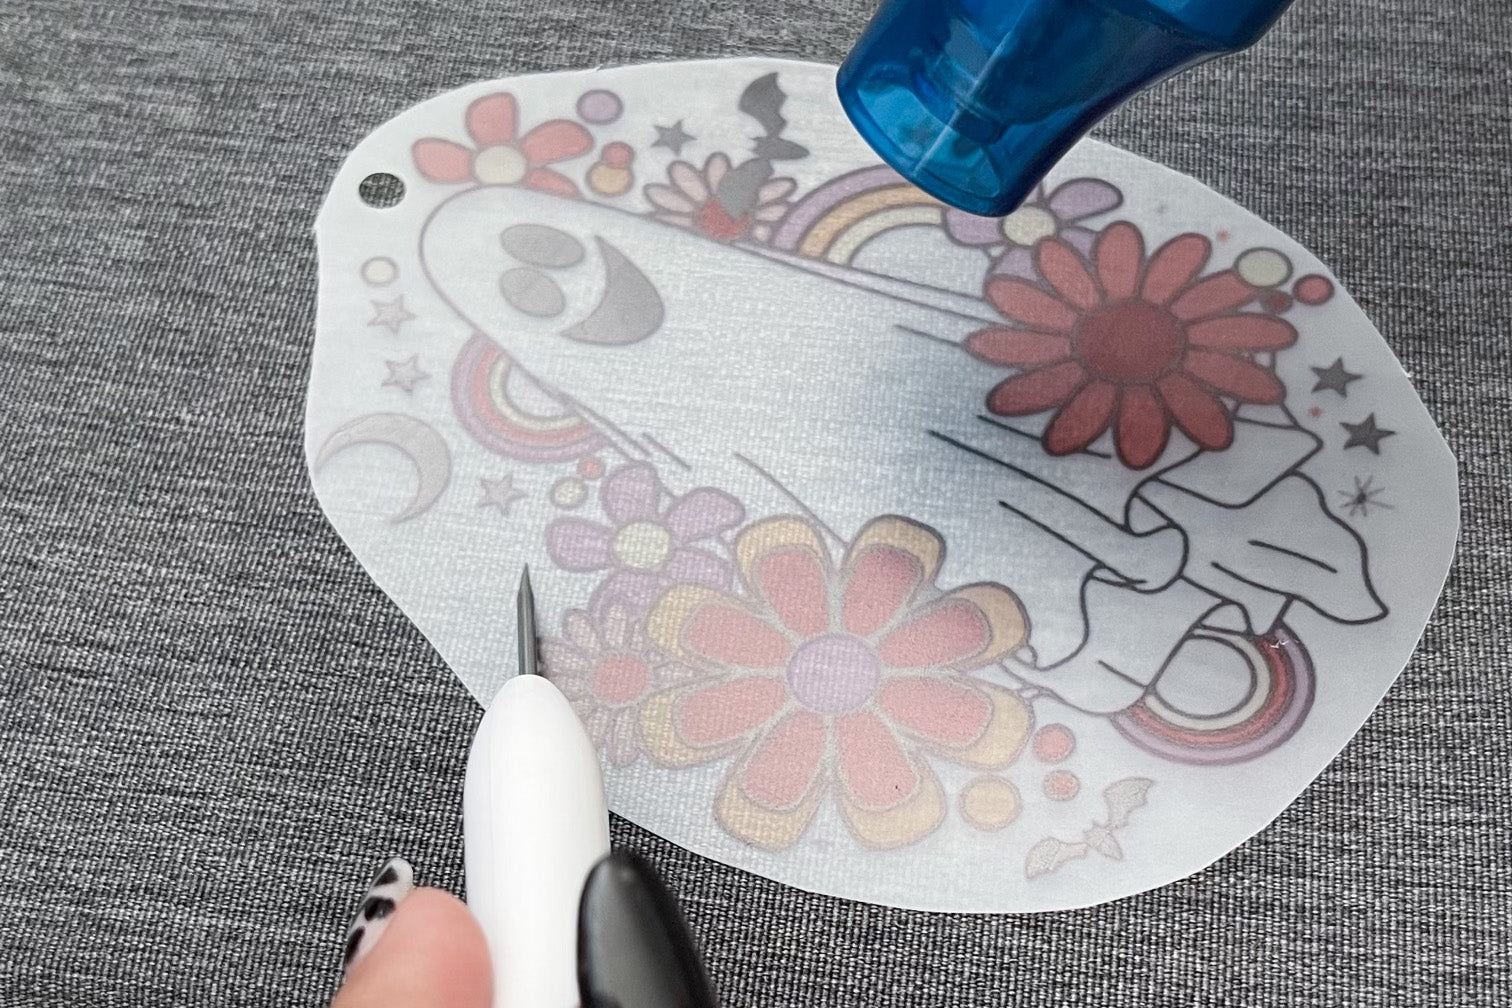 Which is Better: Shrinky Dink Paper or Grafix Shrink Film?